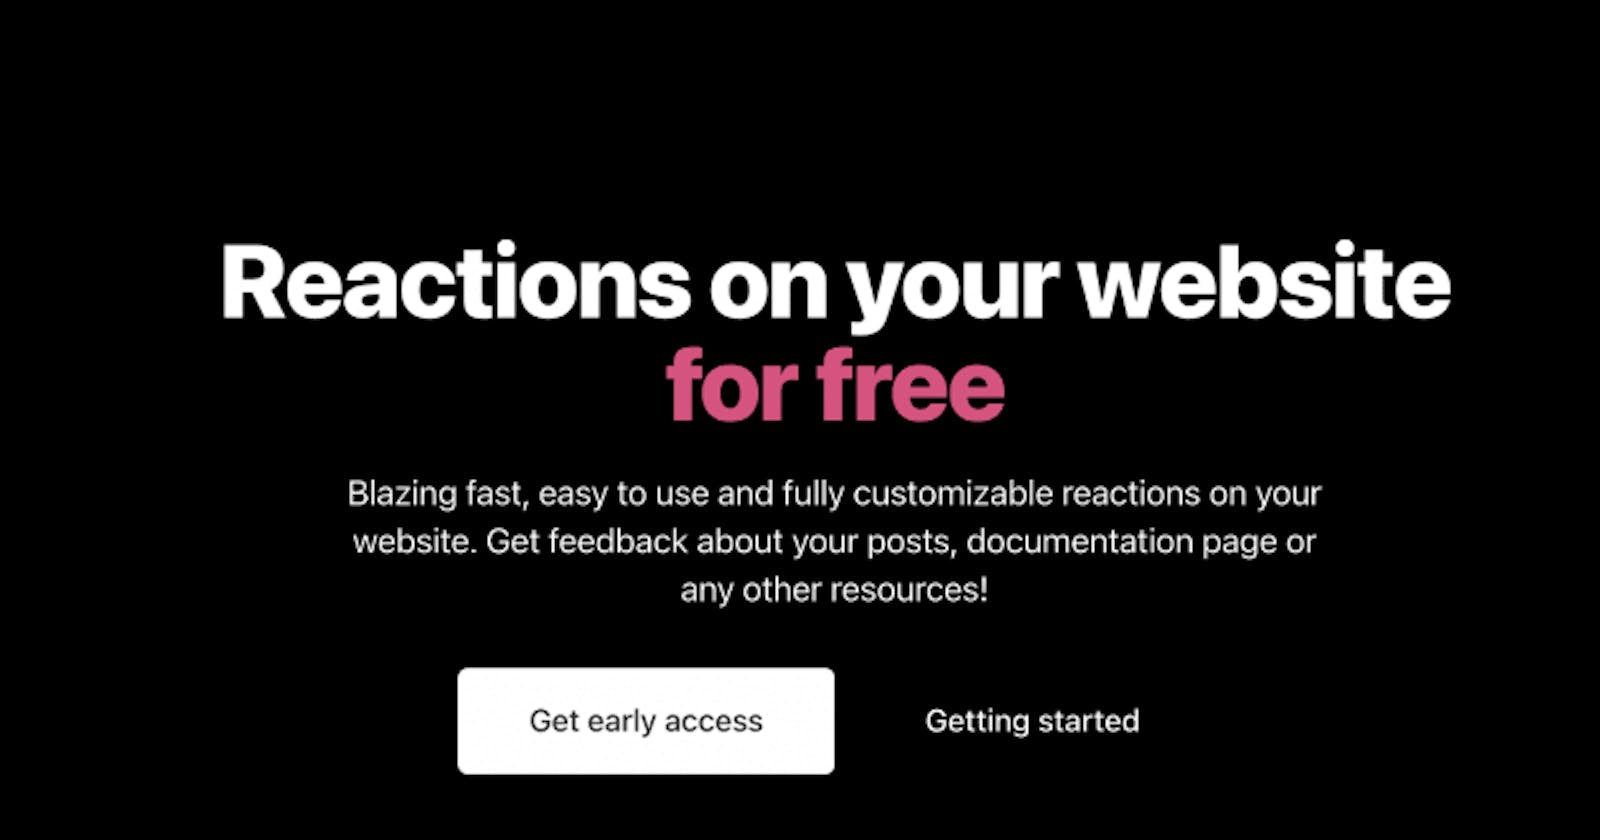 Happy React: Reactions on your website for free